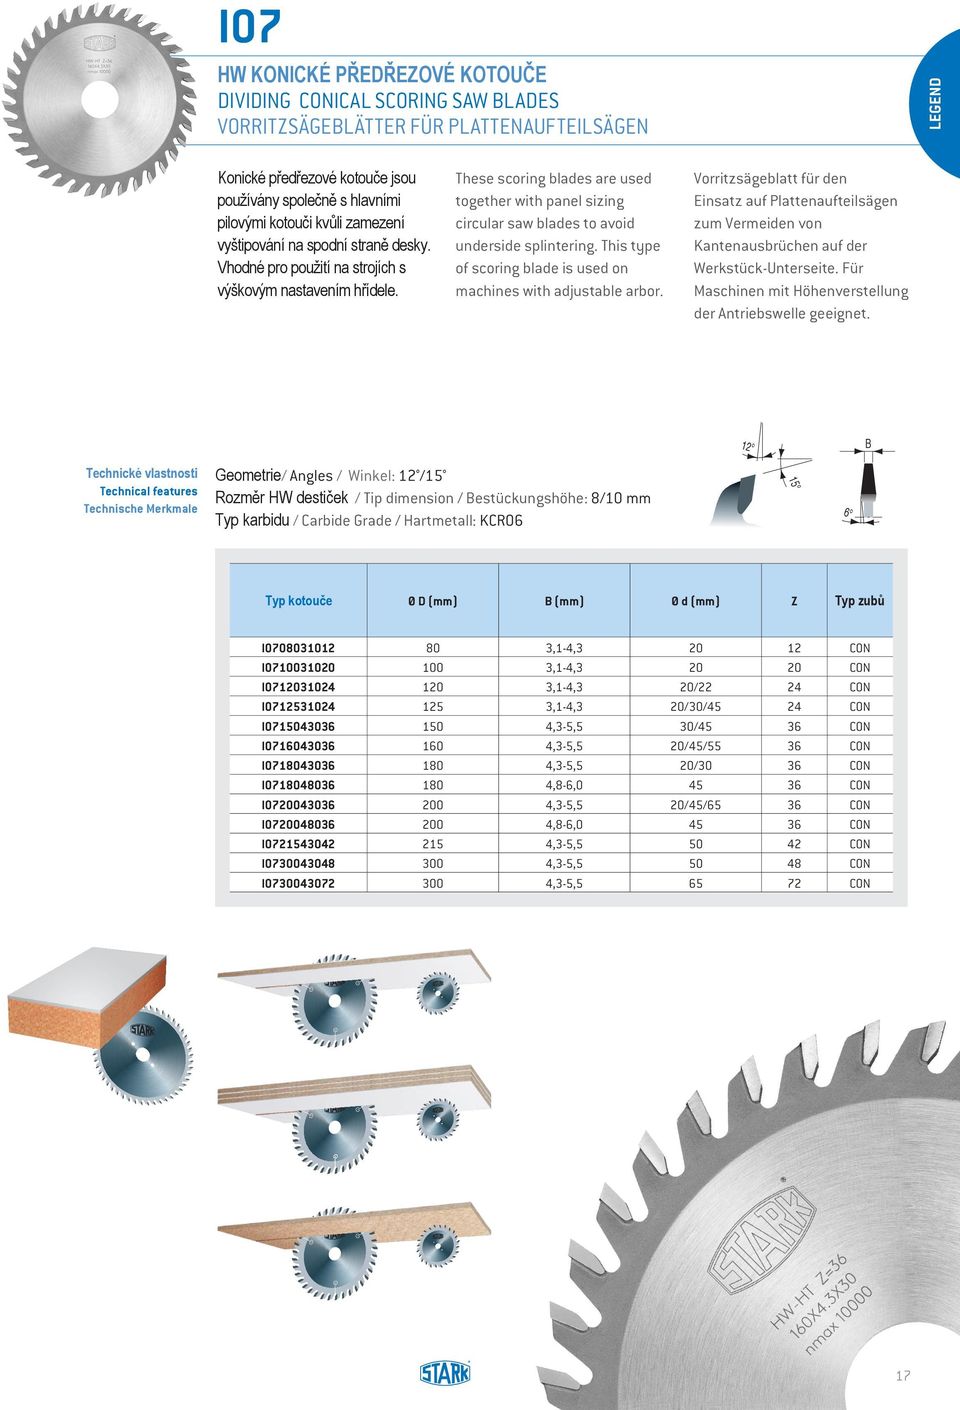 These scoring blades are used together with panel sizing circular saw blades to avoid underside splintering. This type of scoring blade is used on machines with adjustable arbor.